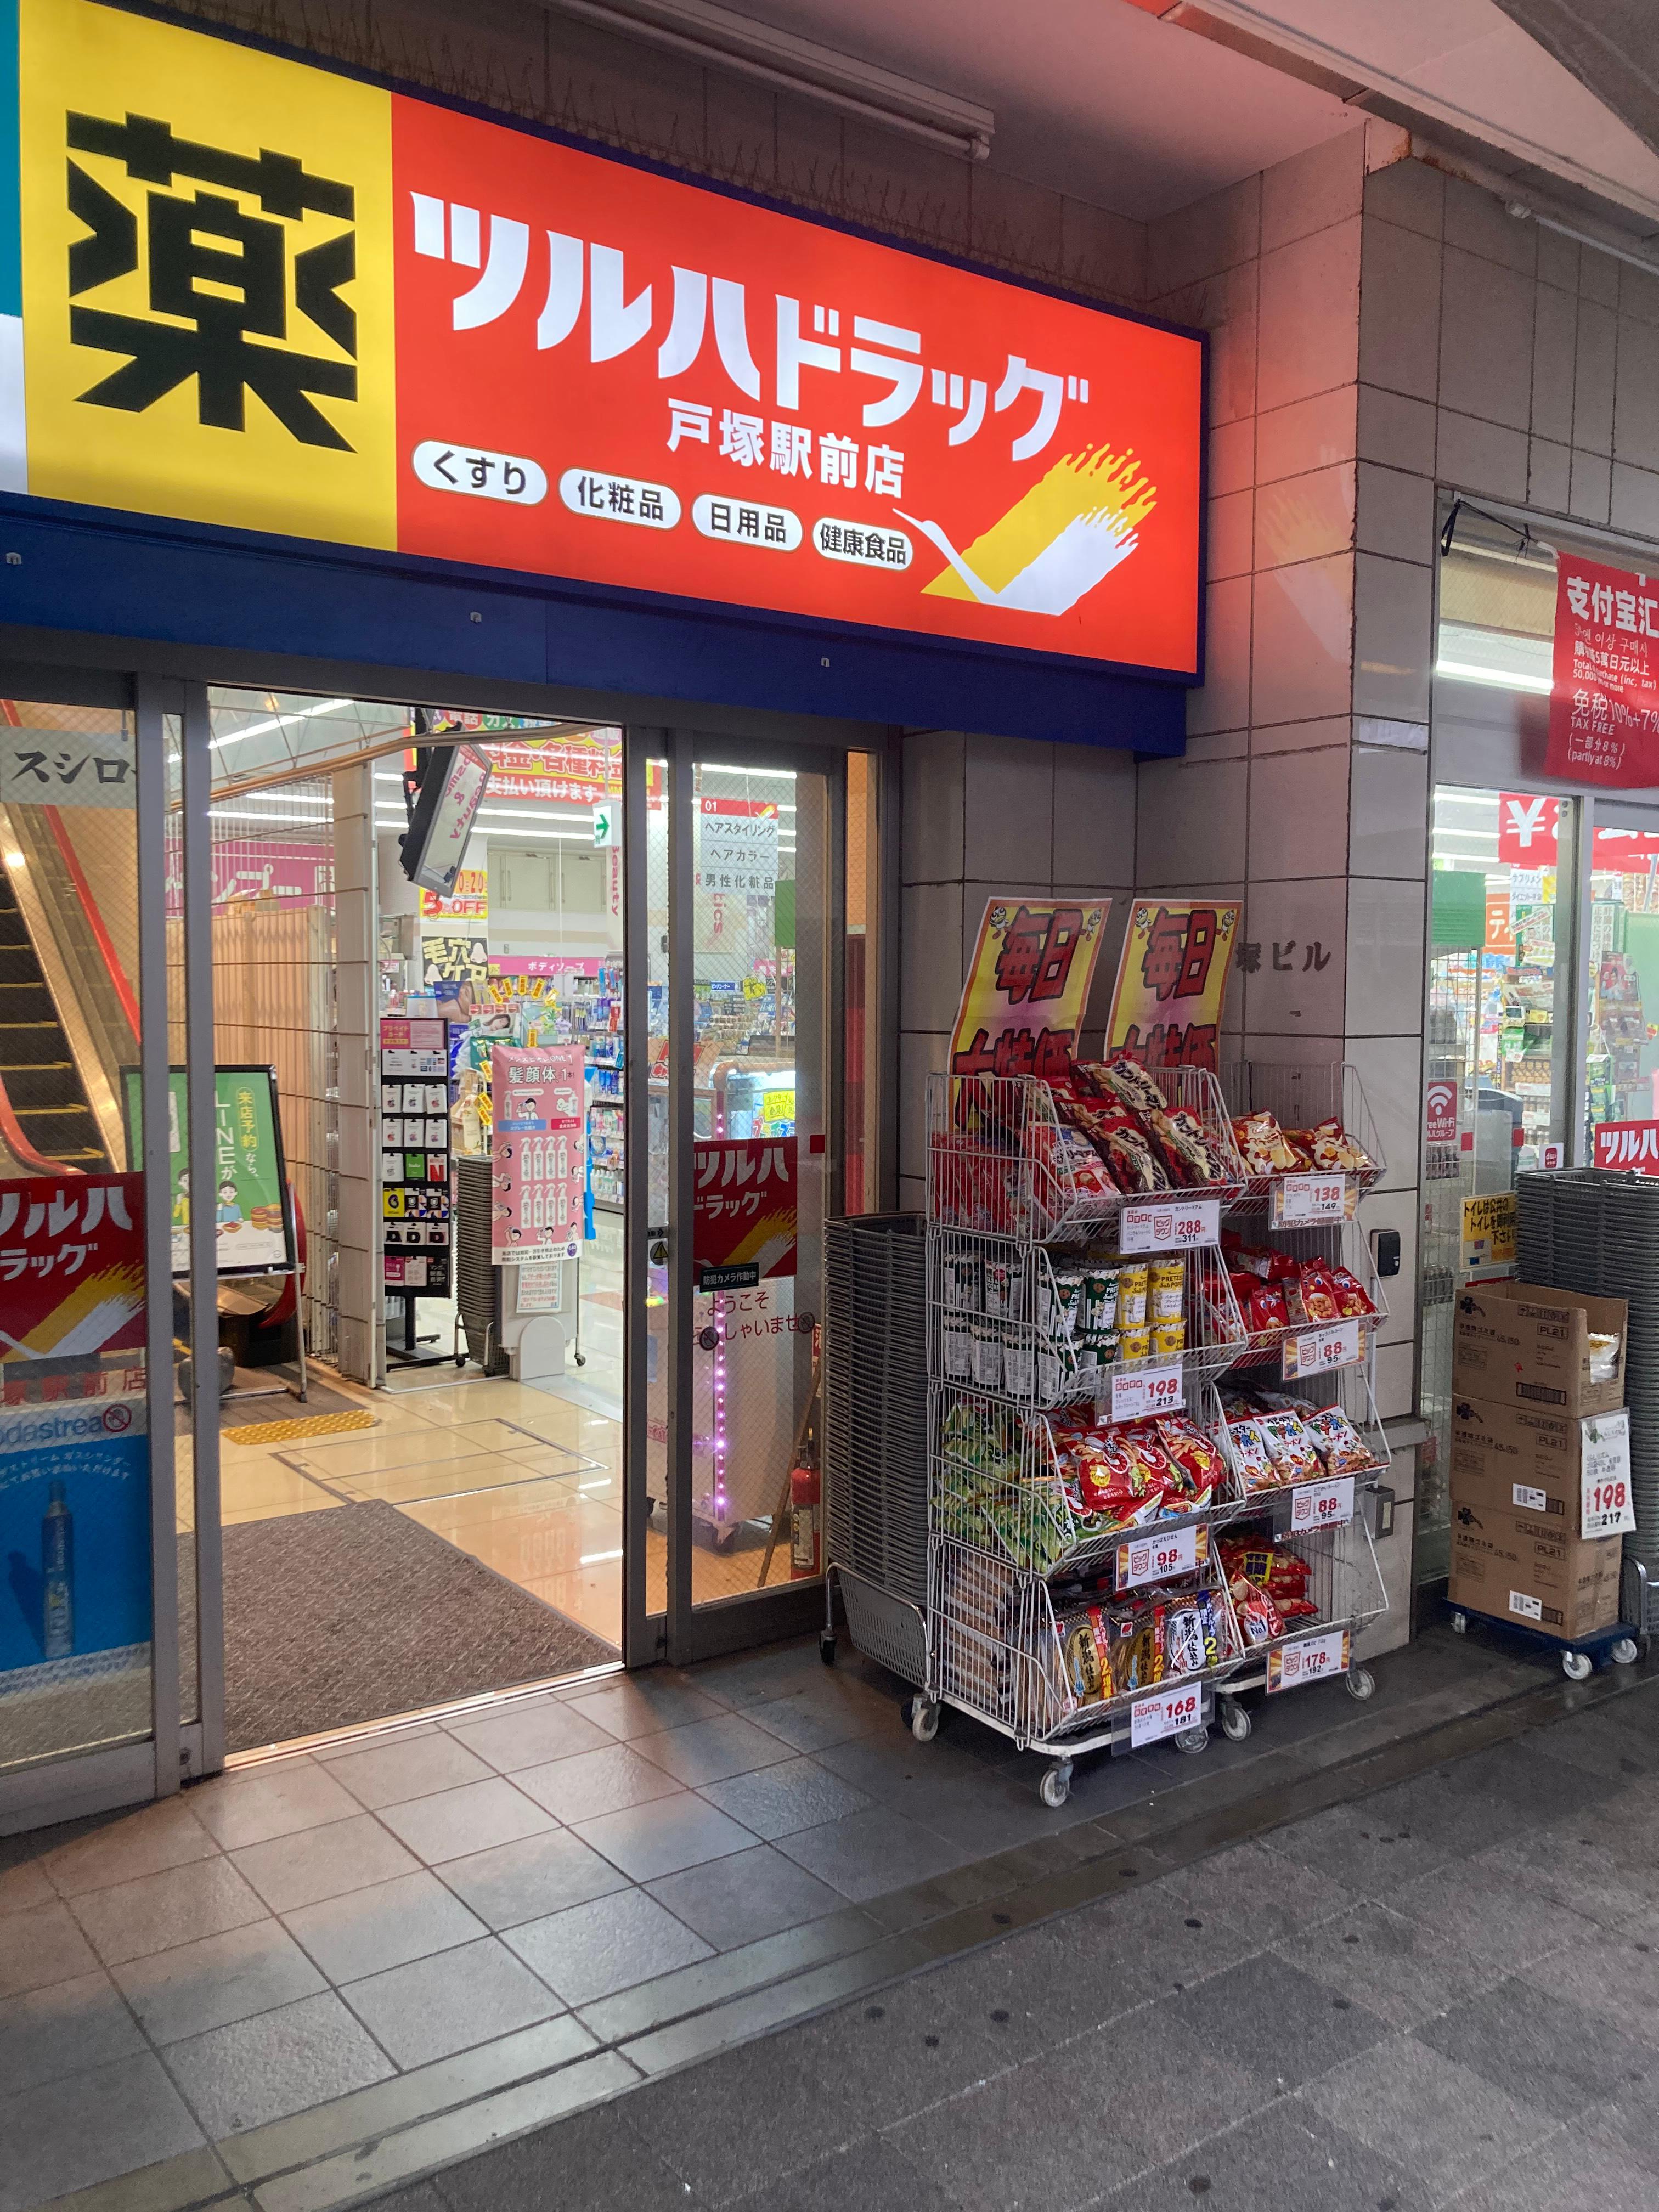 Images ツルハドラッグ 戸塚駅前店